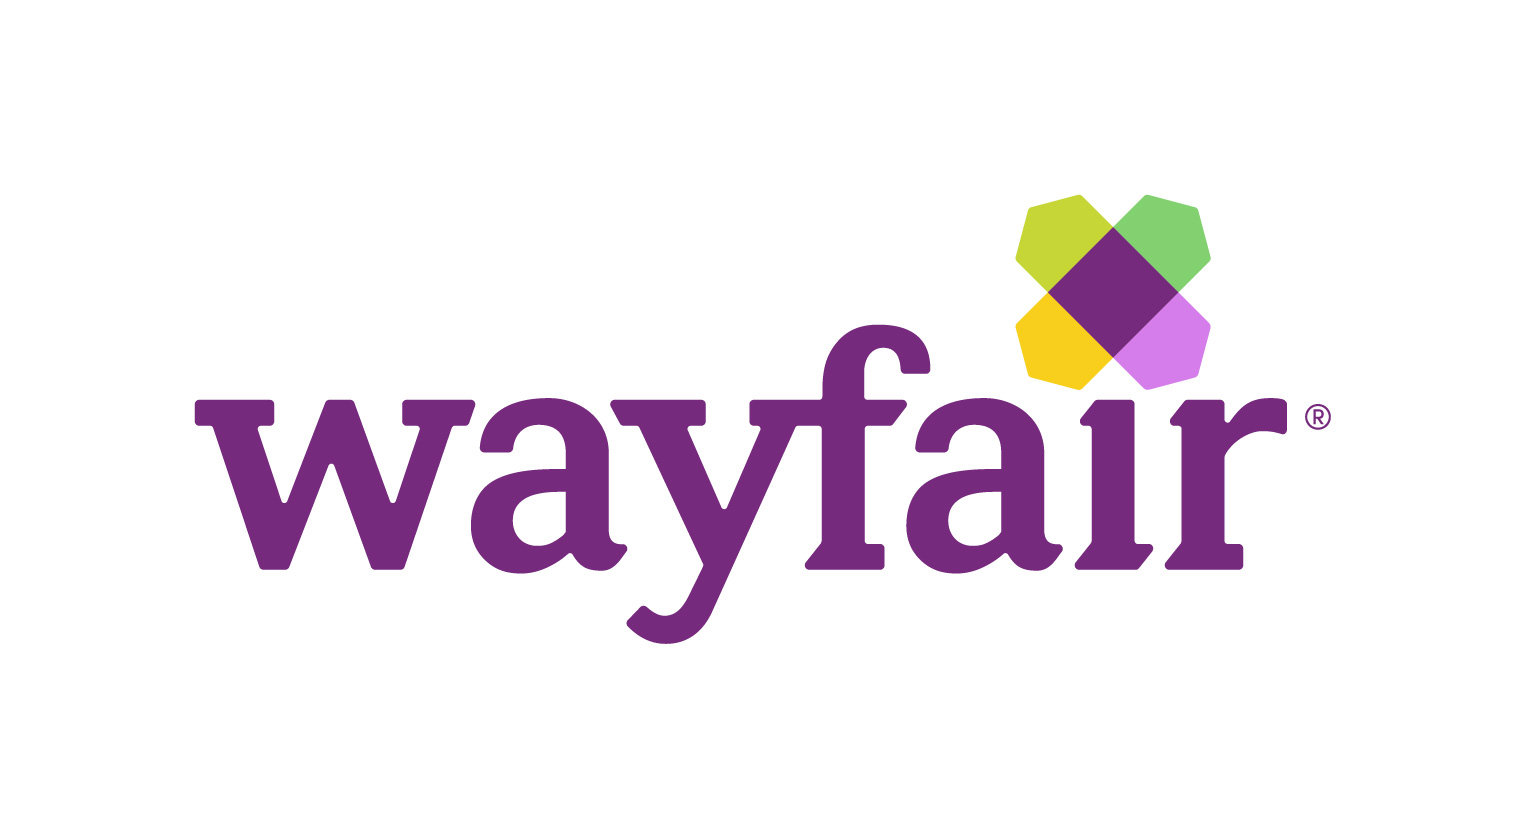 Wayfair is our recommended furniture store in Boston